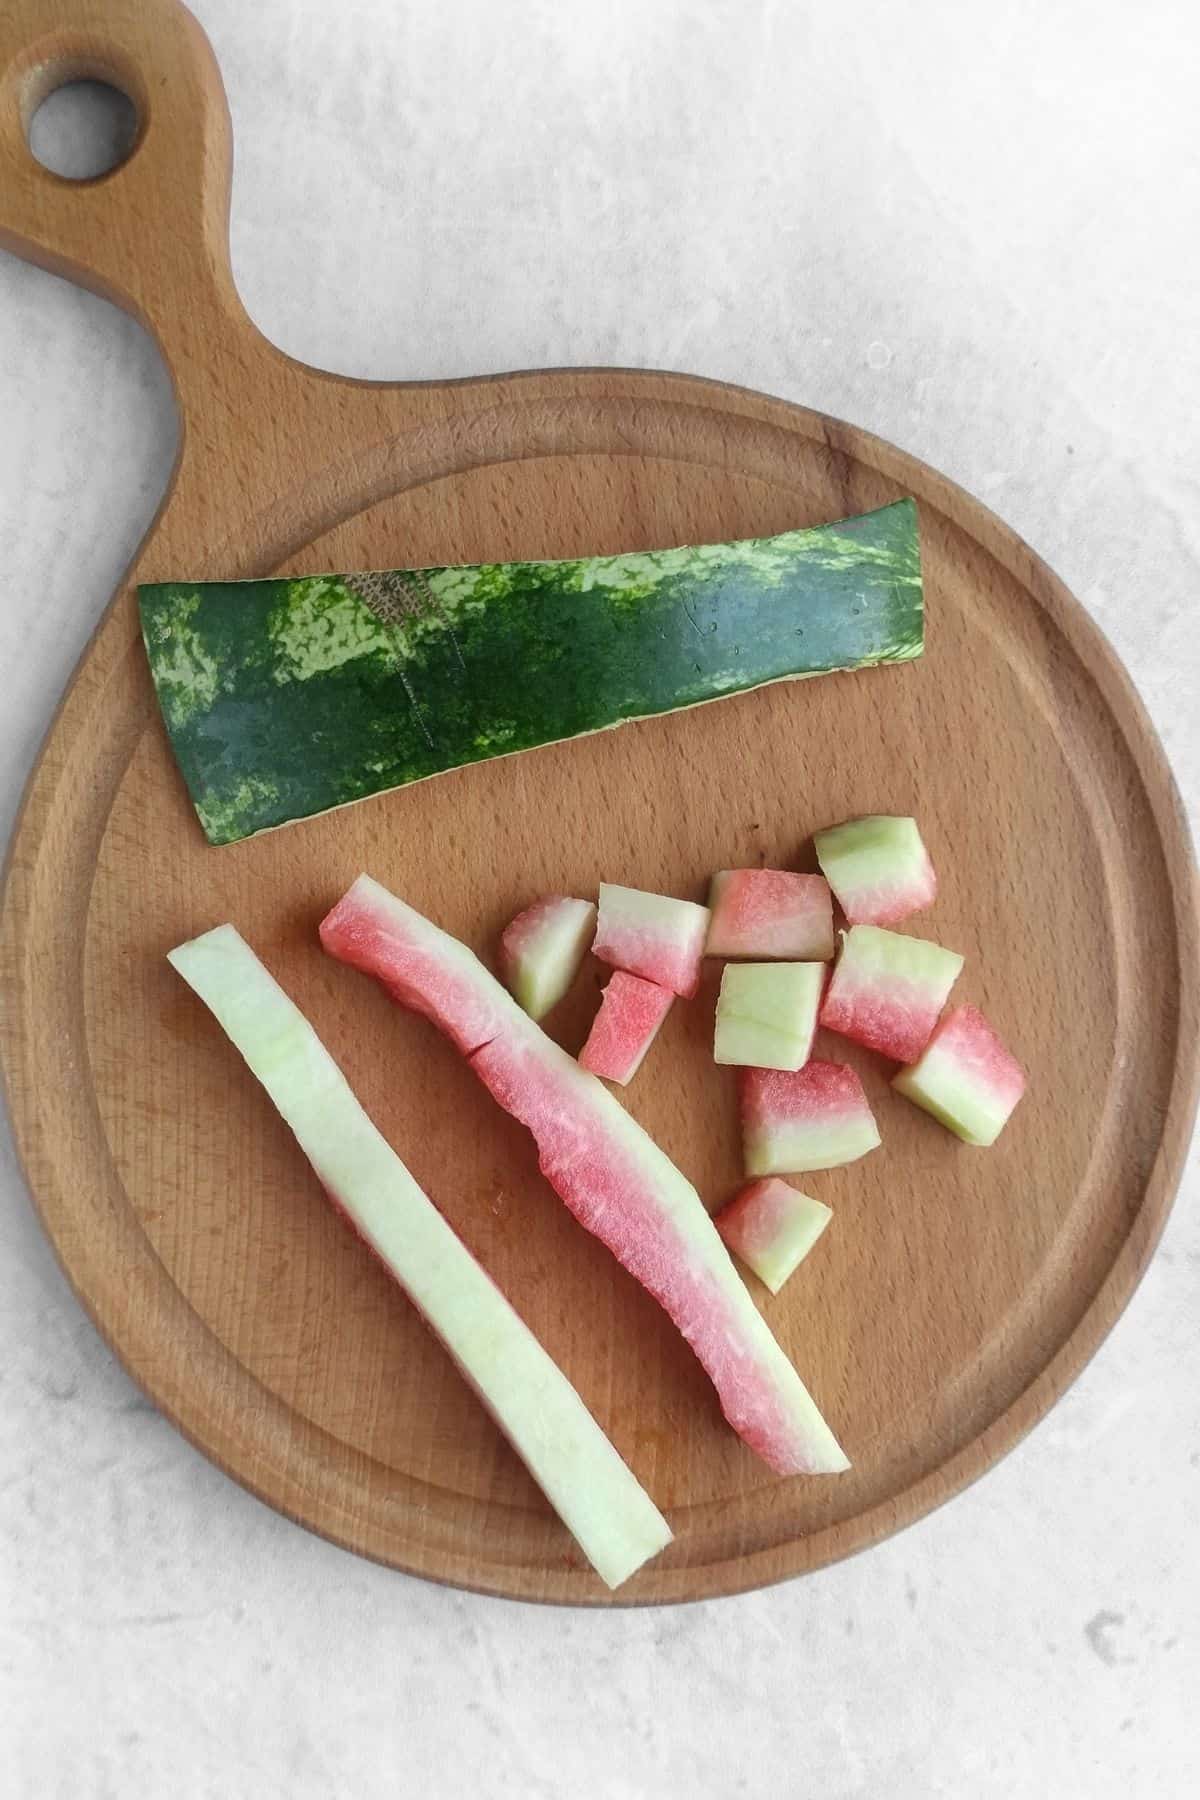 Watermelon being cut up on a wooden cutting board.